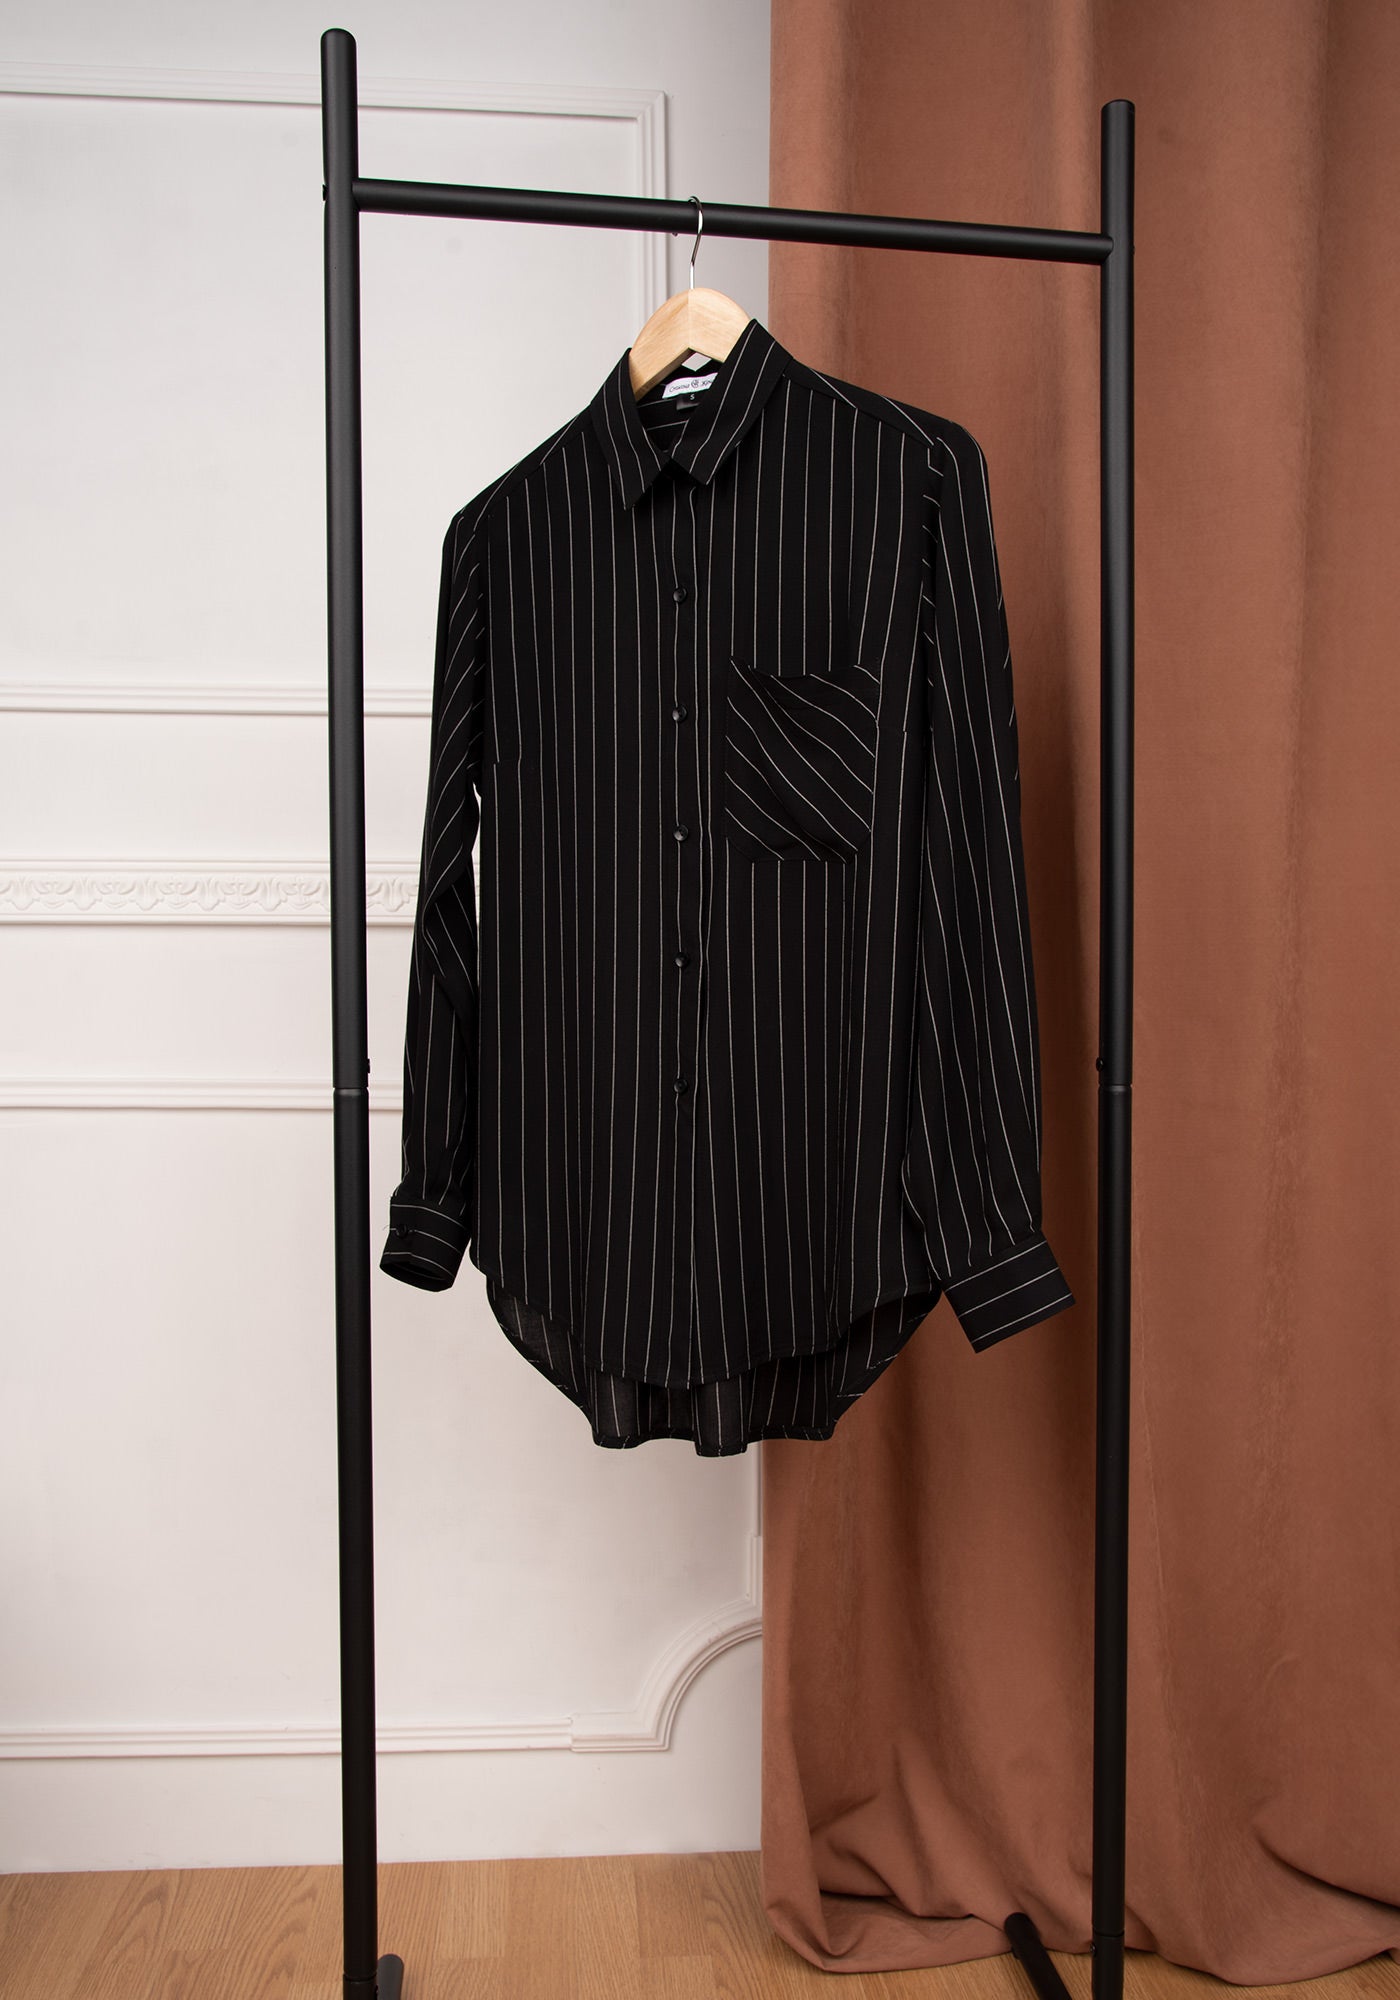 Women's Relaxed fit Shirt in Black with White Pinstripe